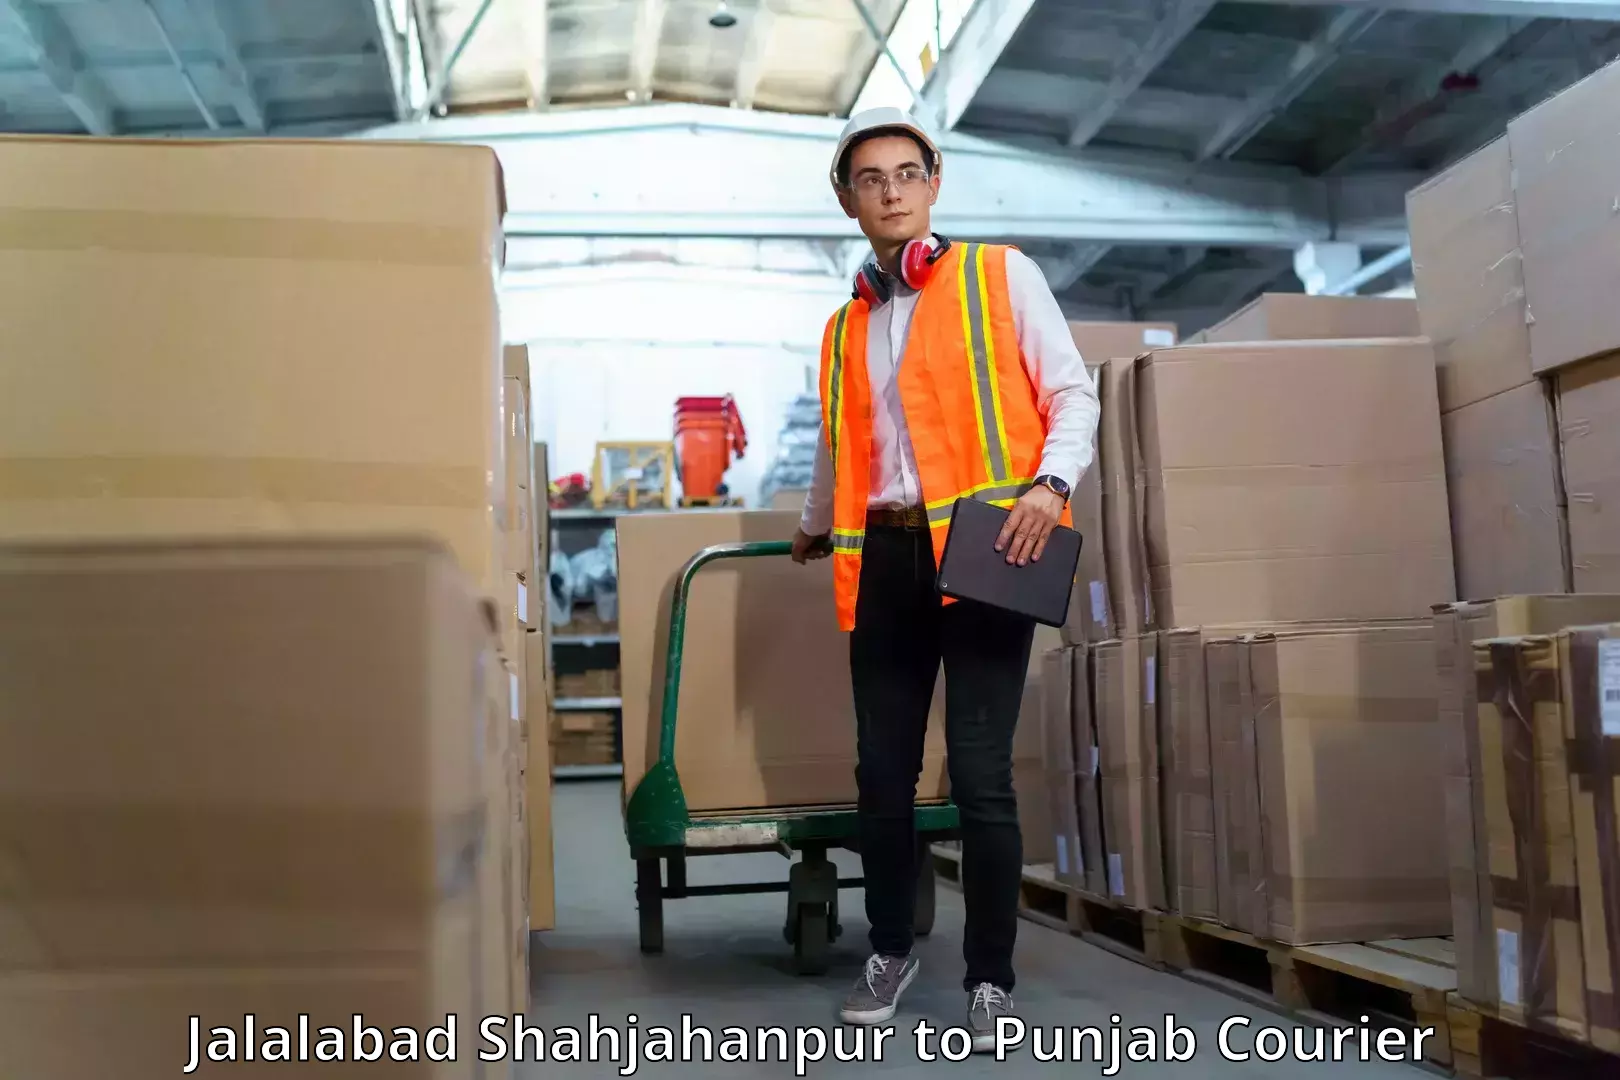 Quality courier services Jalalabad Shahjahanpur to Punjab Agricultural University Ludhiana